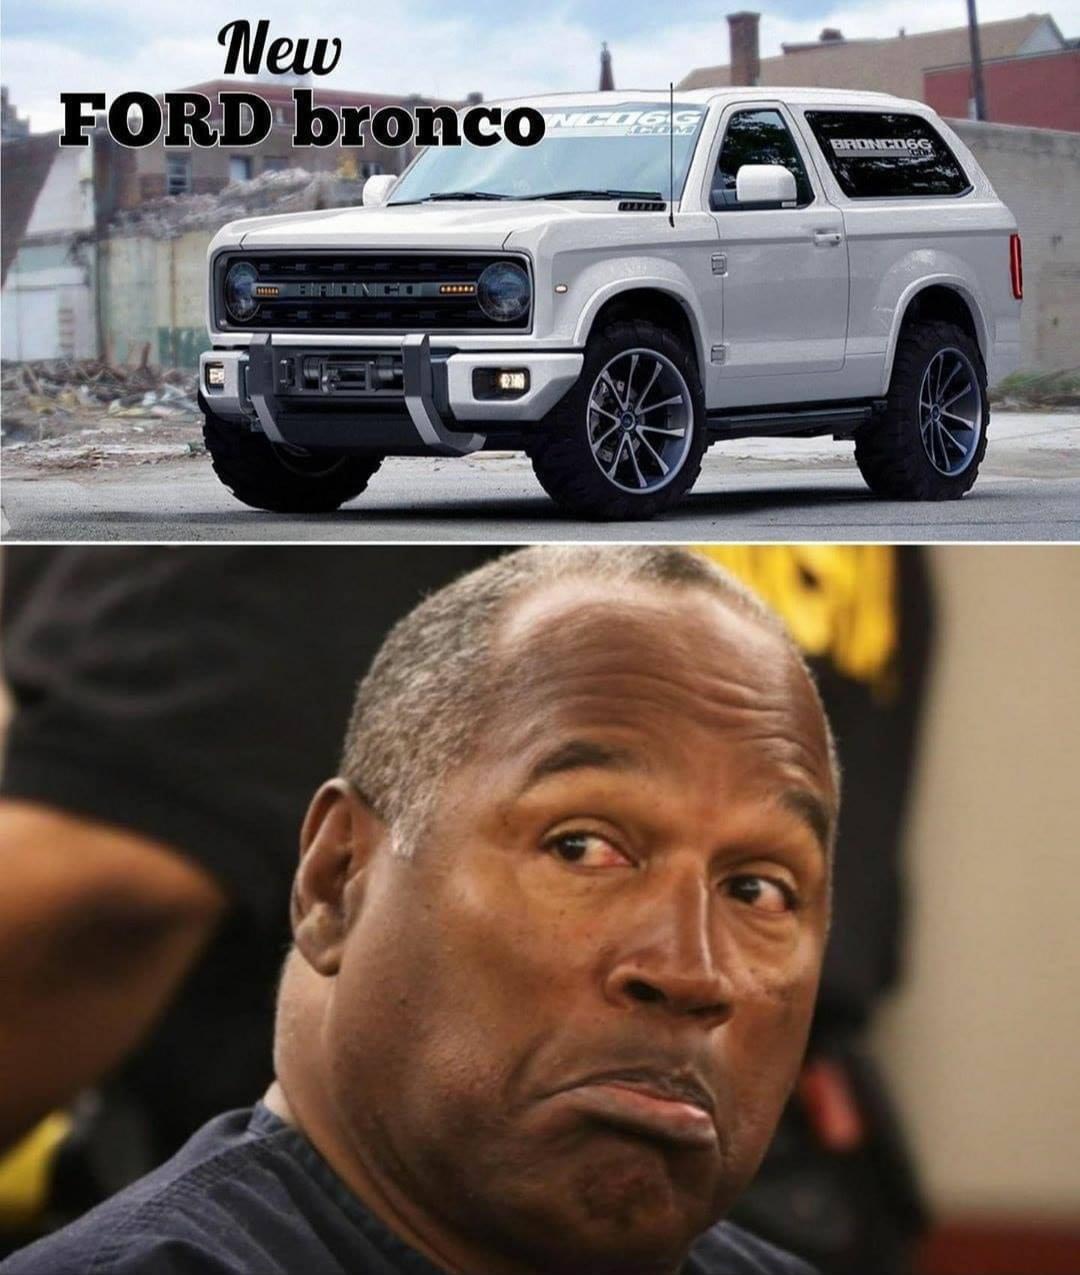 new ford bronco - New Ford bronco Broncogg